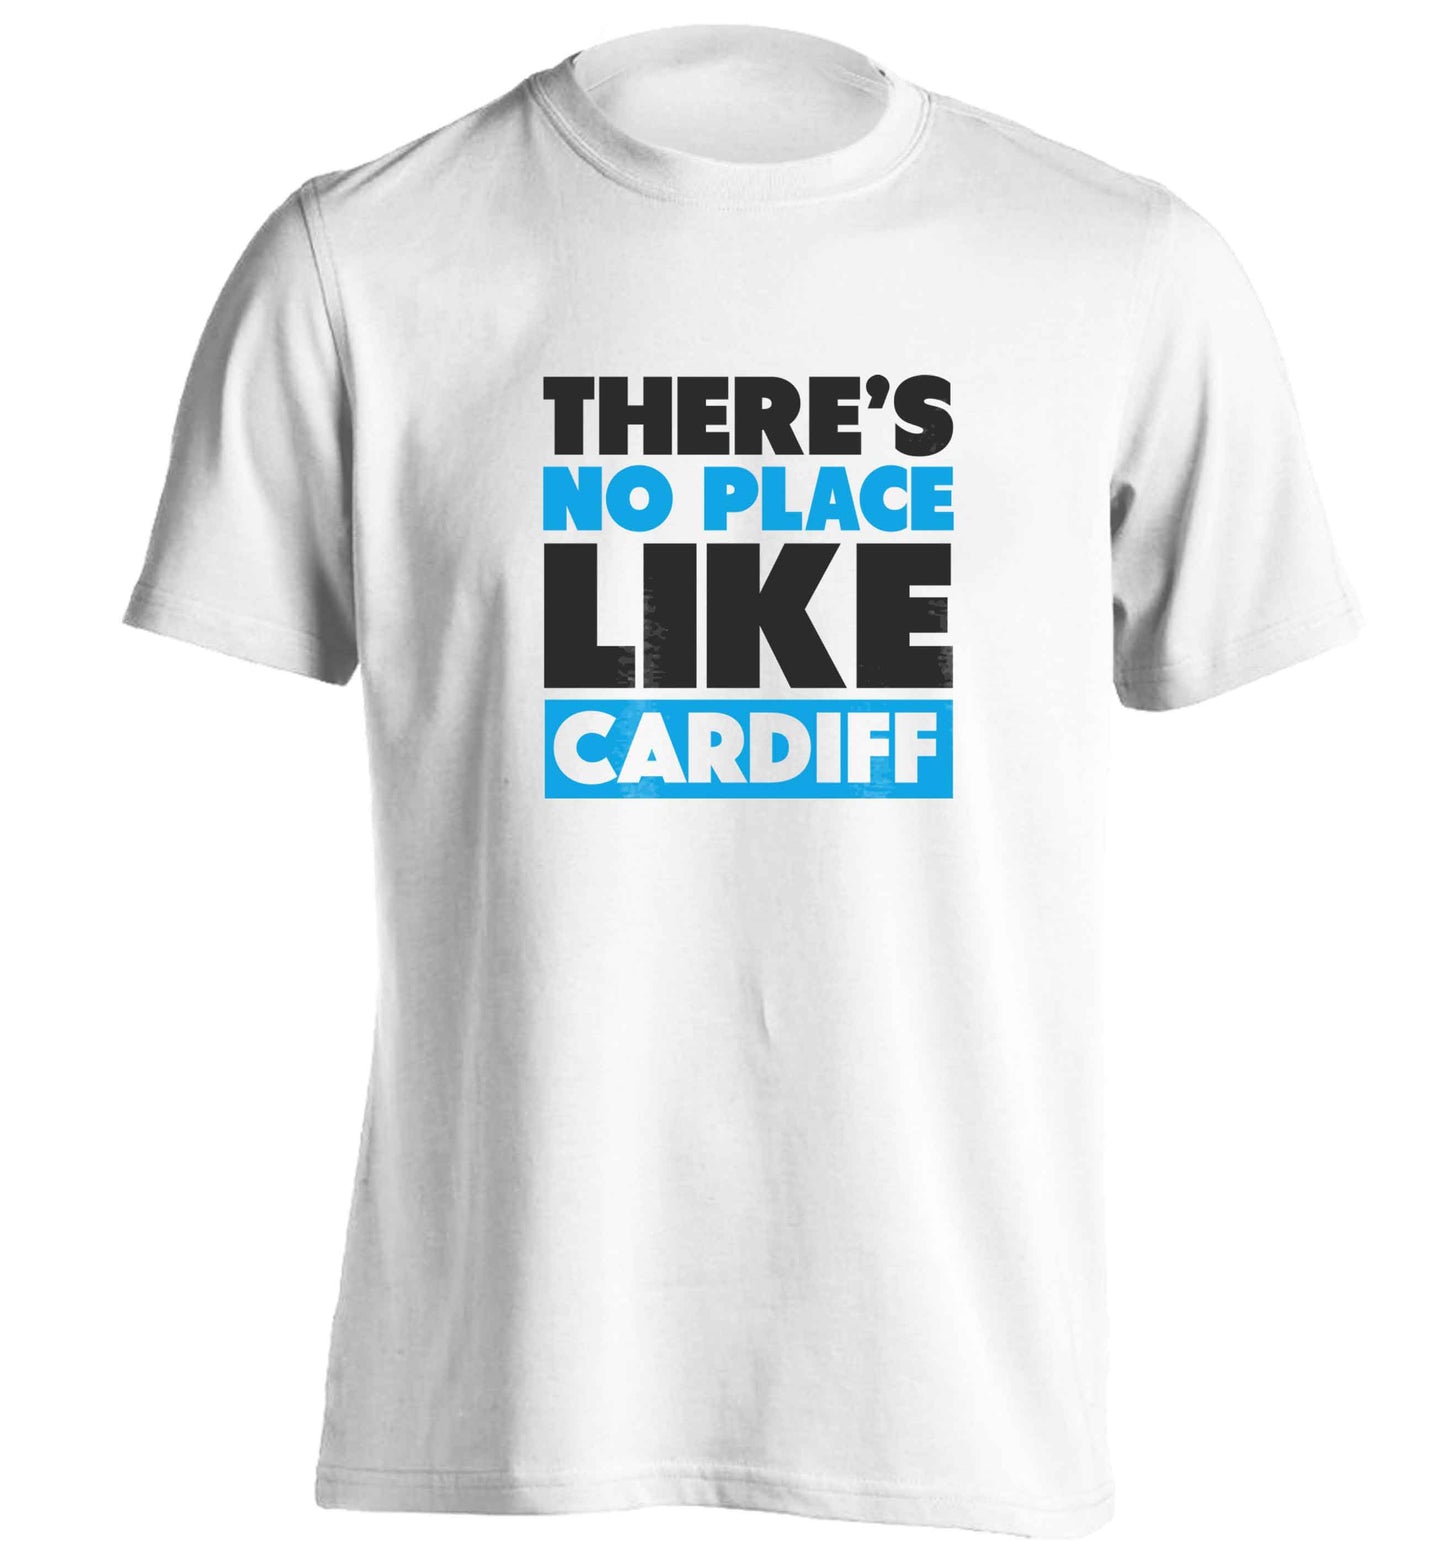 There's no place like Cardiff adults unisex white Tshirt 2XL